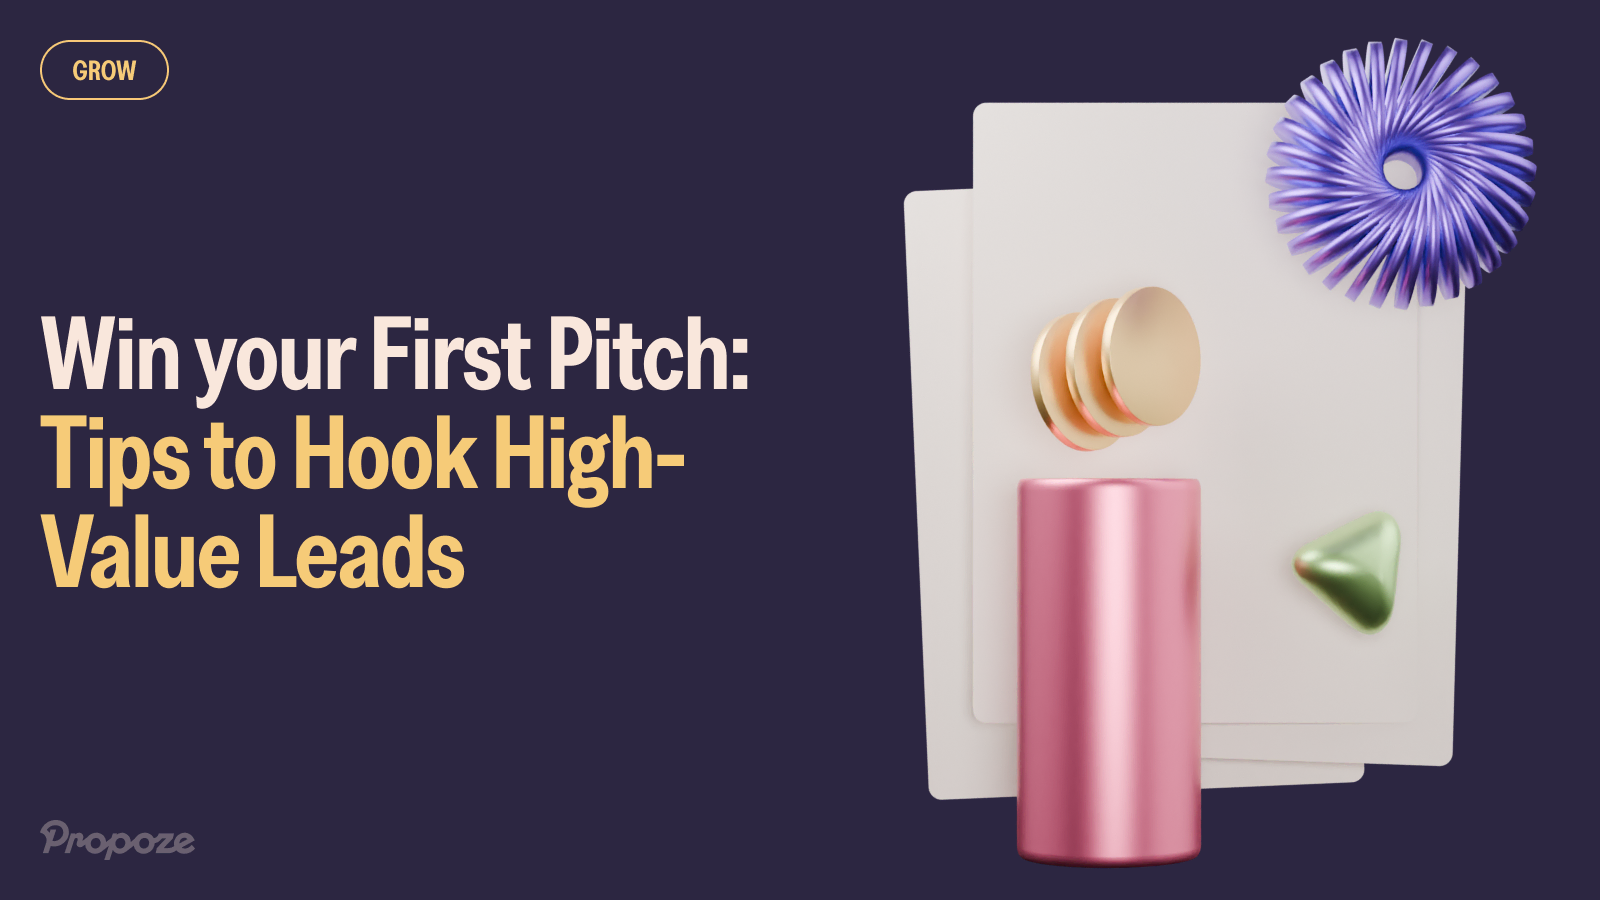 Win your First Pitch: Tips to Hook High-Value Leads